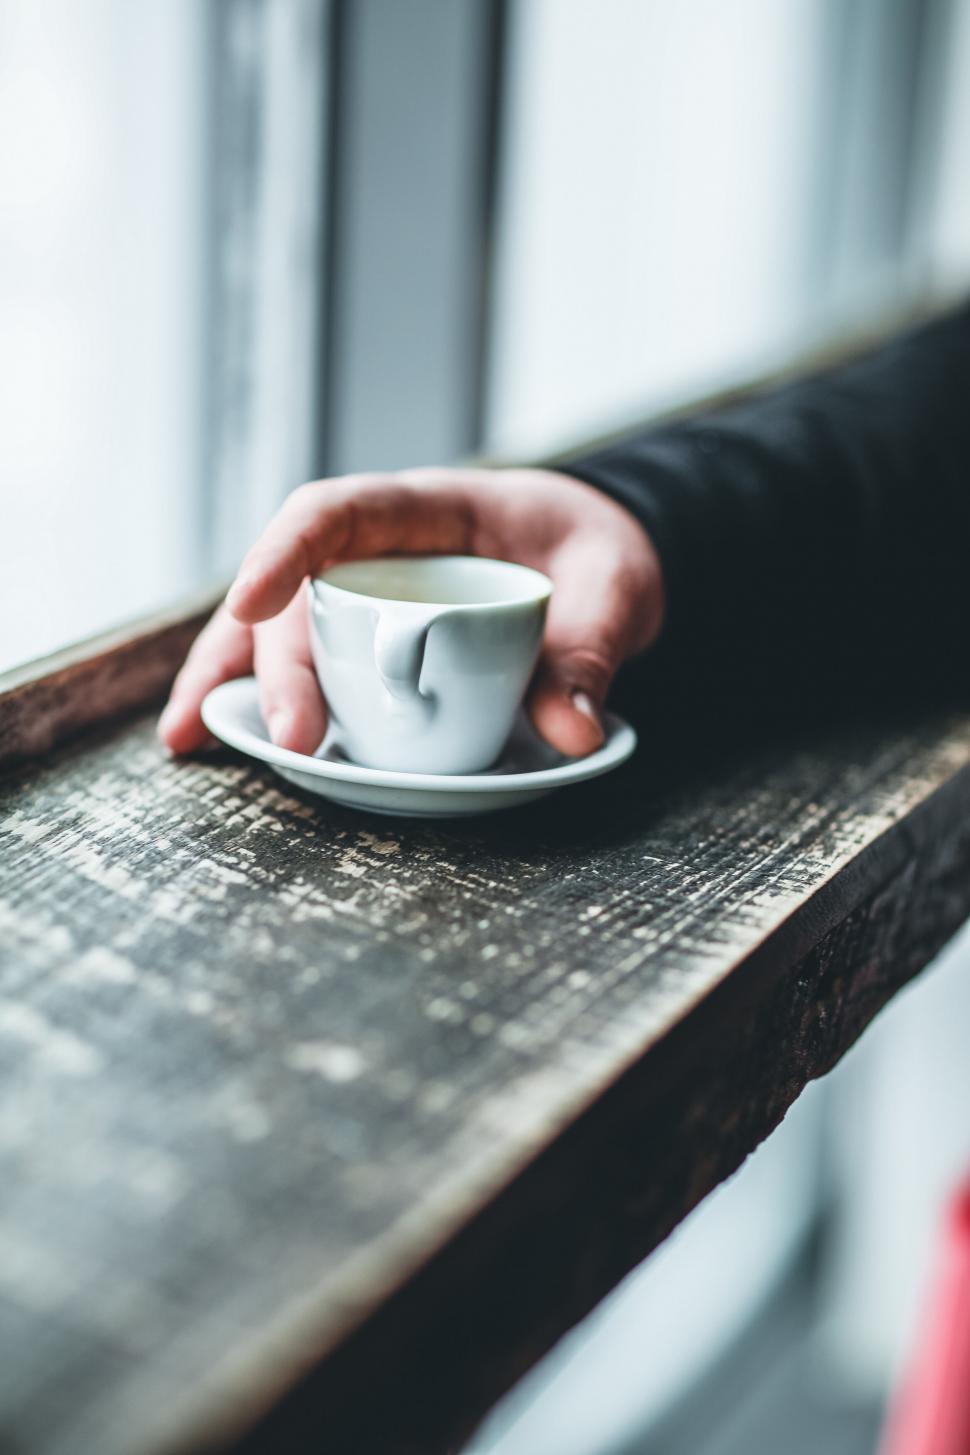 Free Image of A hand holding a cup and saucer 